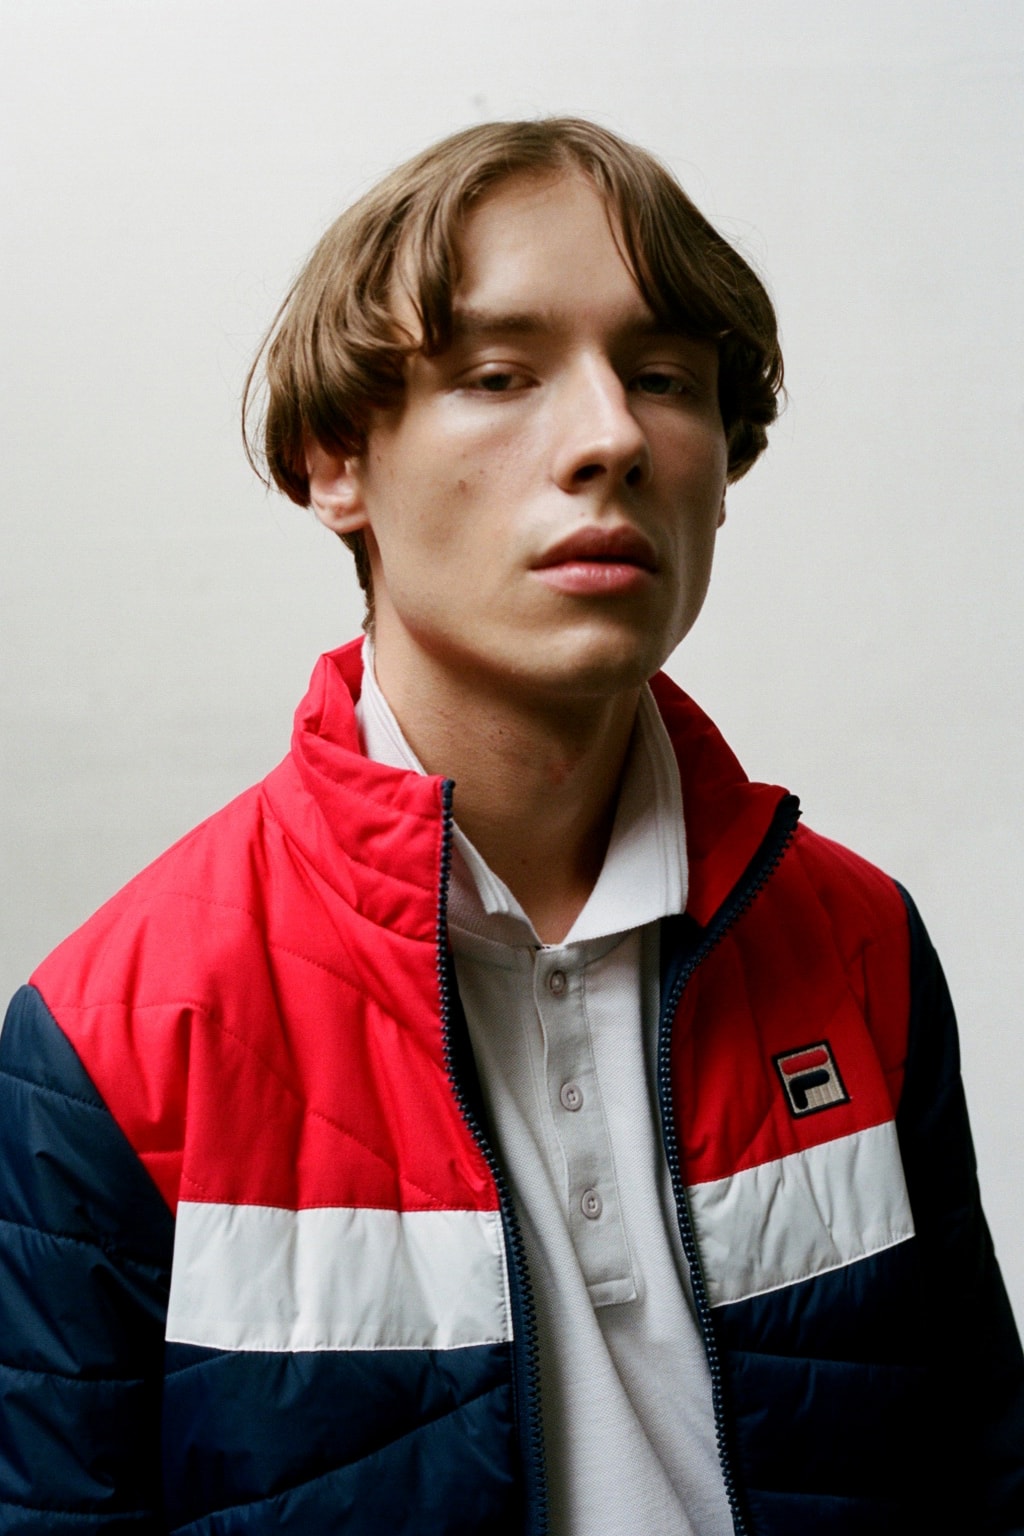 FILA 2016 Fall/Winter "Vintage" Campaign blue white red